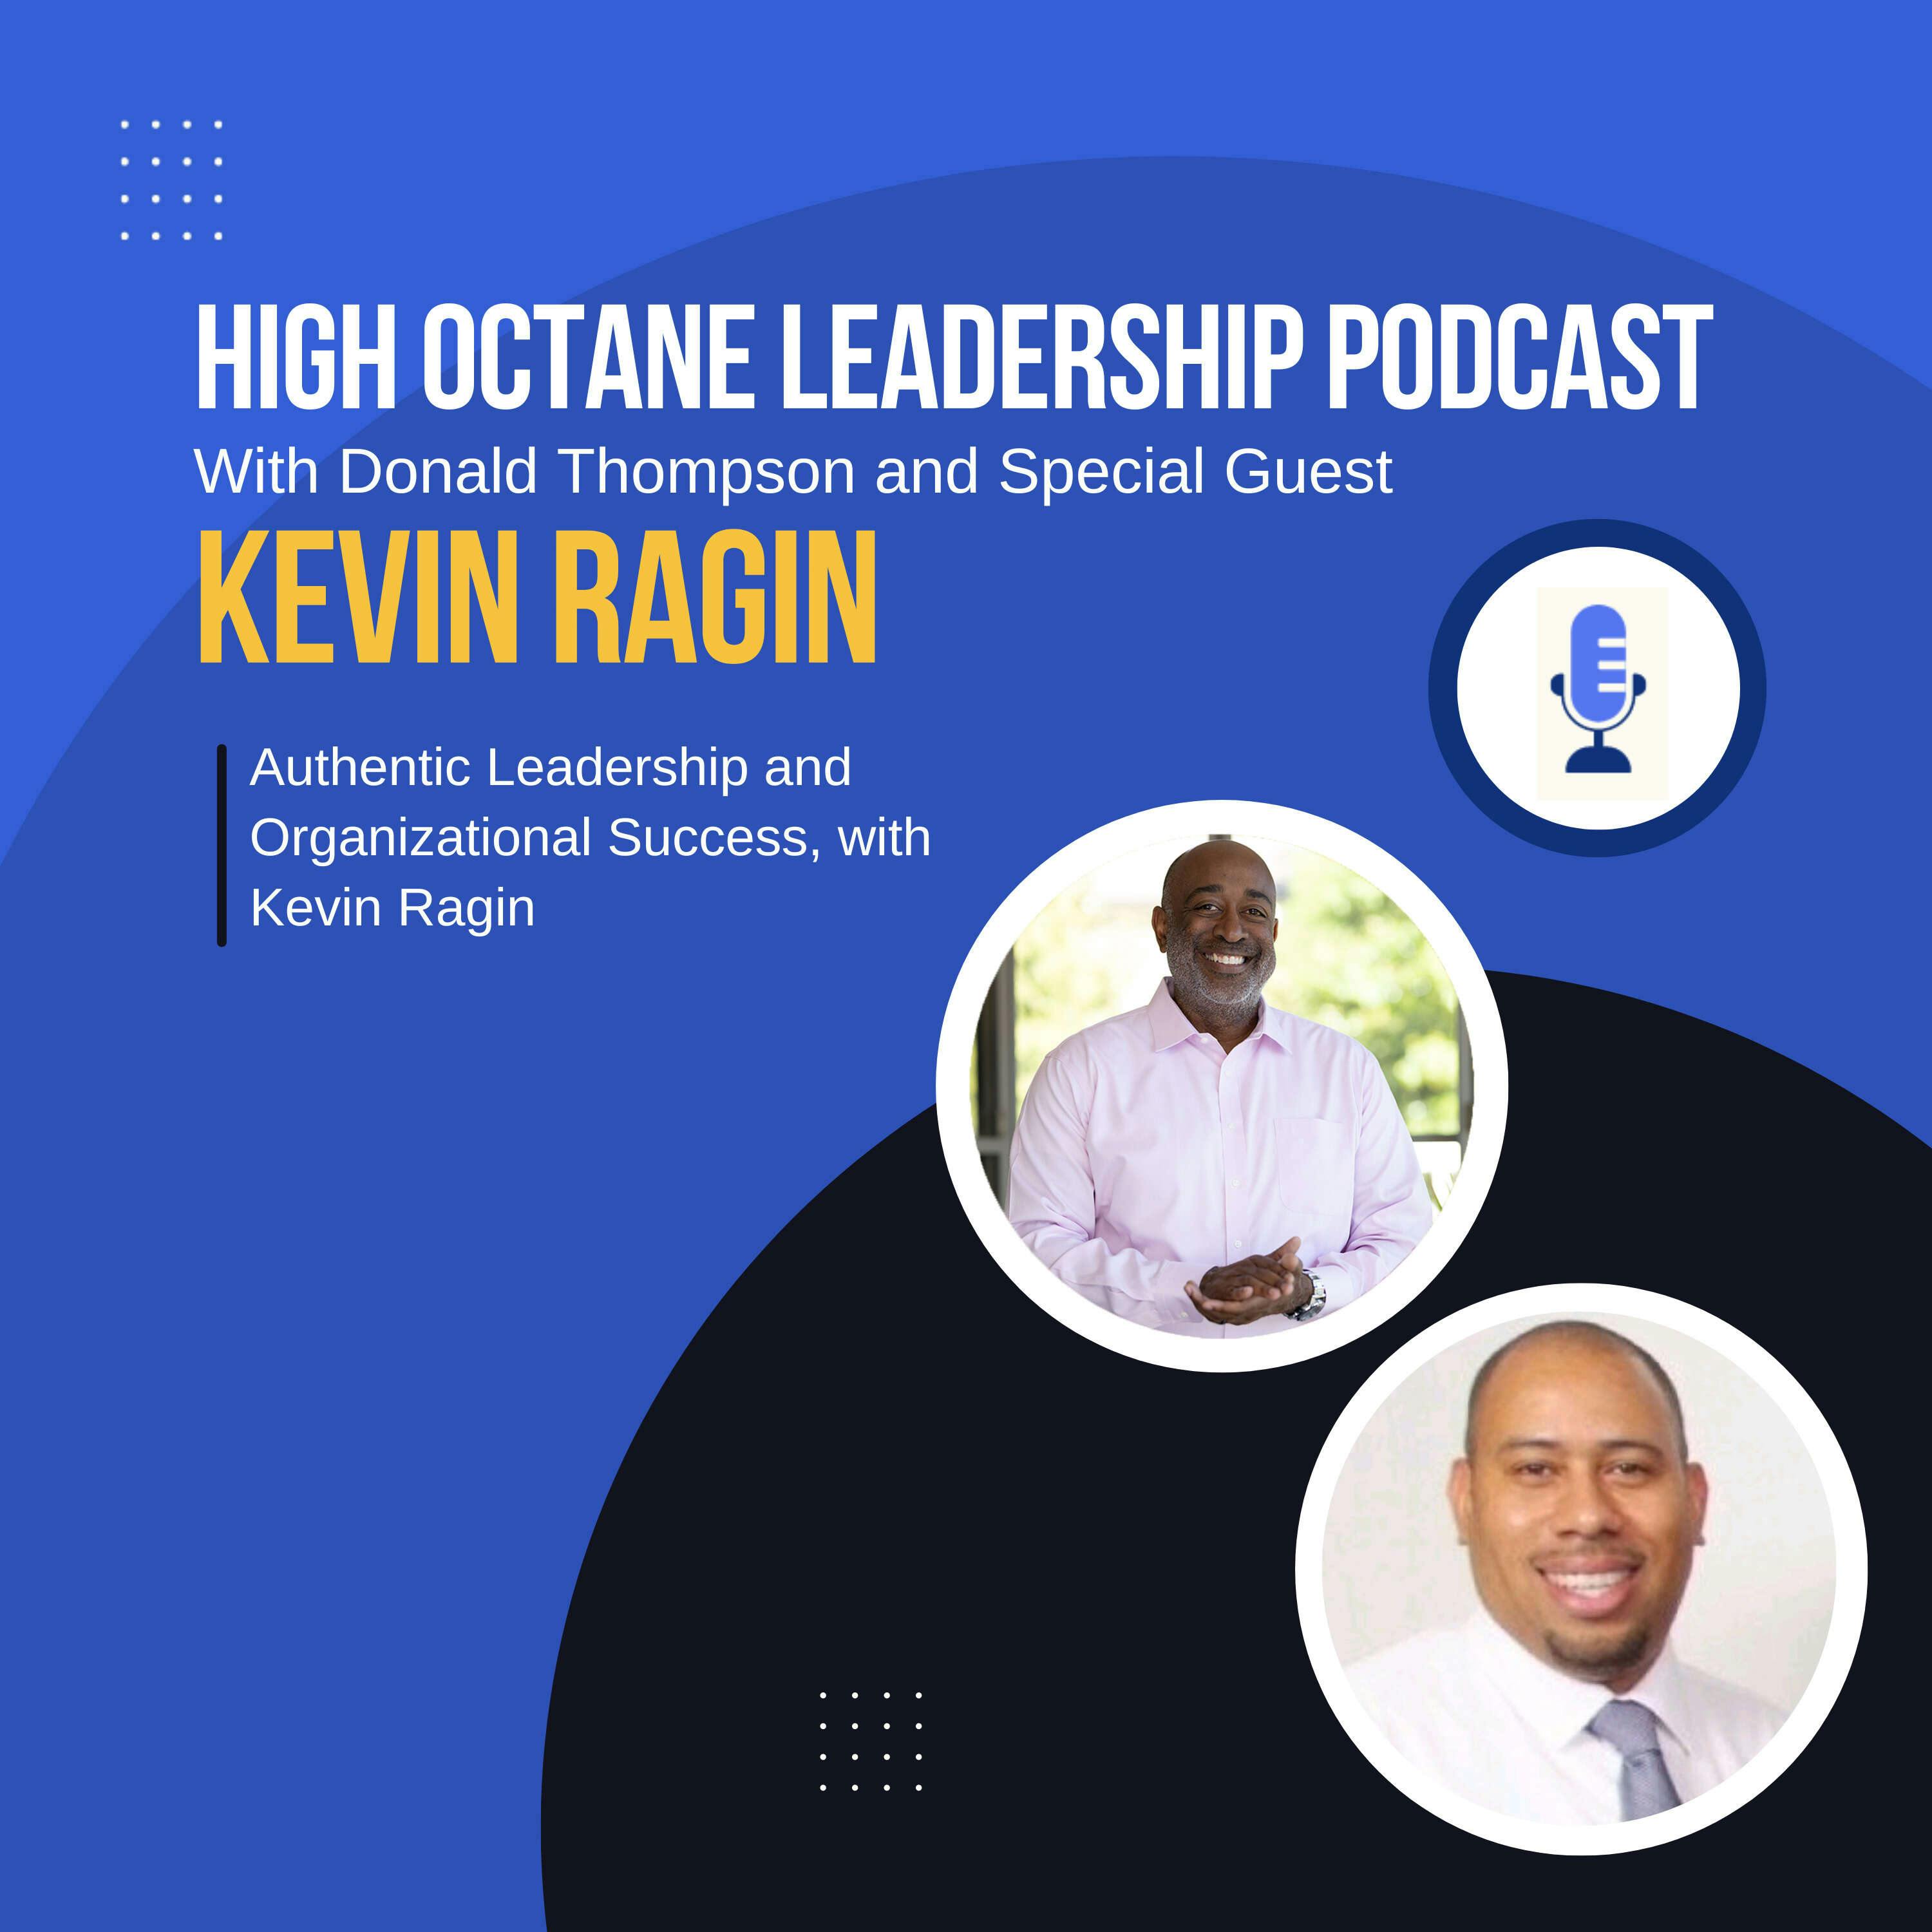 Authentic Leadership and Organizational Success, with Kevin Ragin